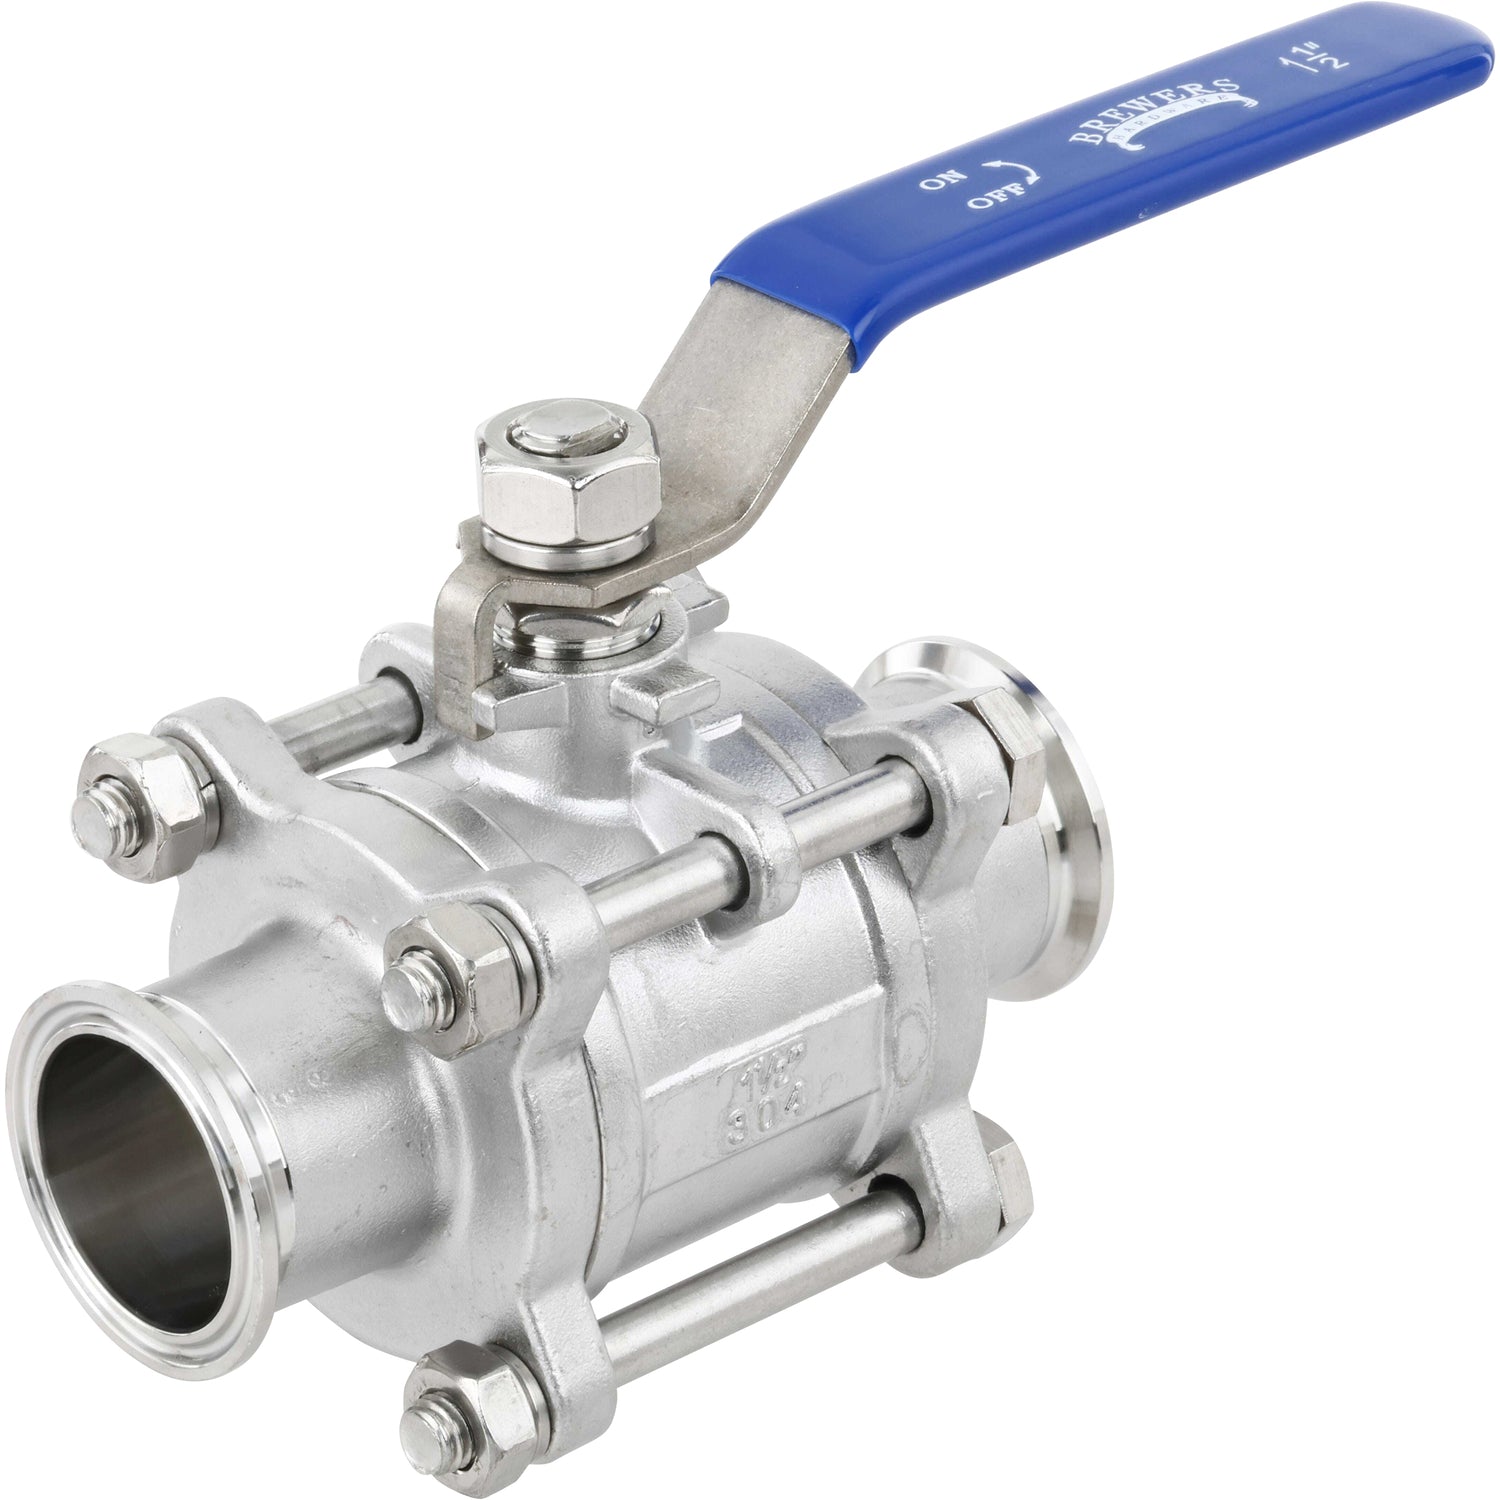 Stainless steel, three piece ball valve with blue handle in the open position. Part shown on white background.  